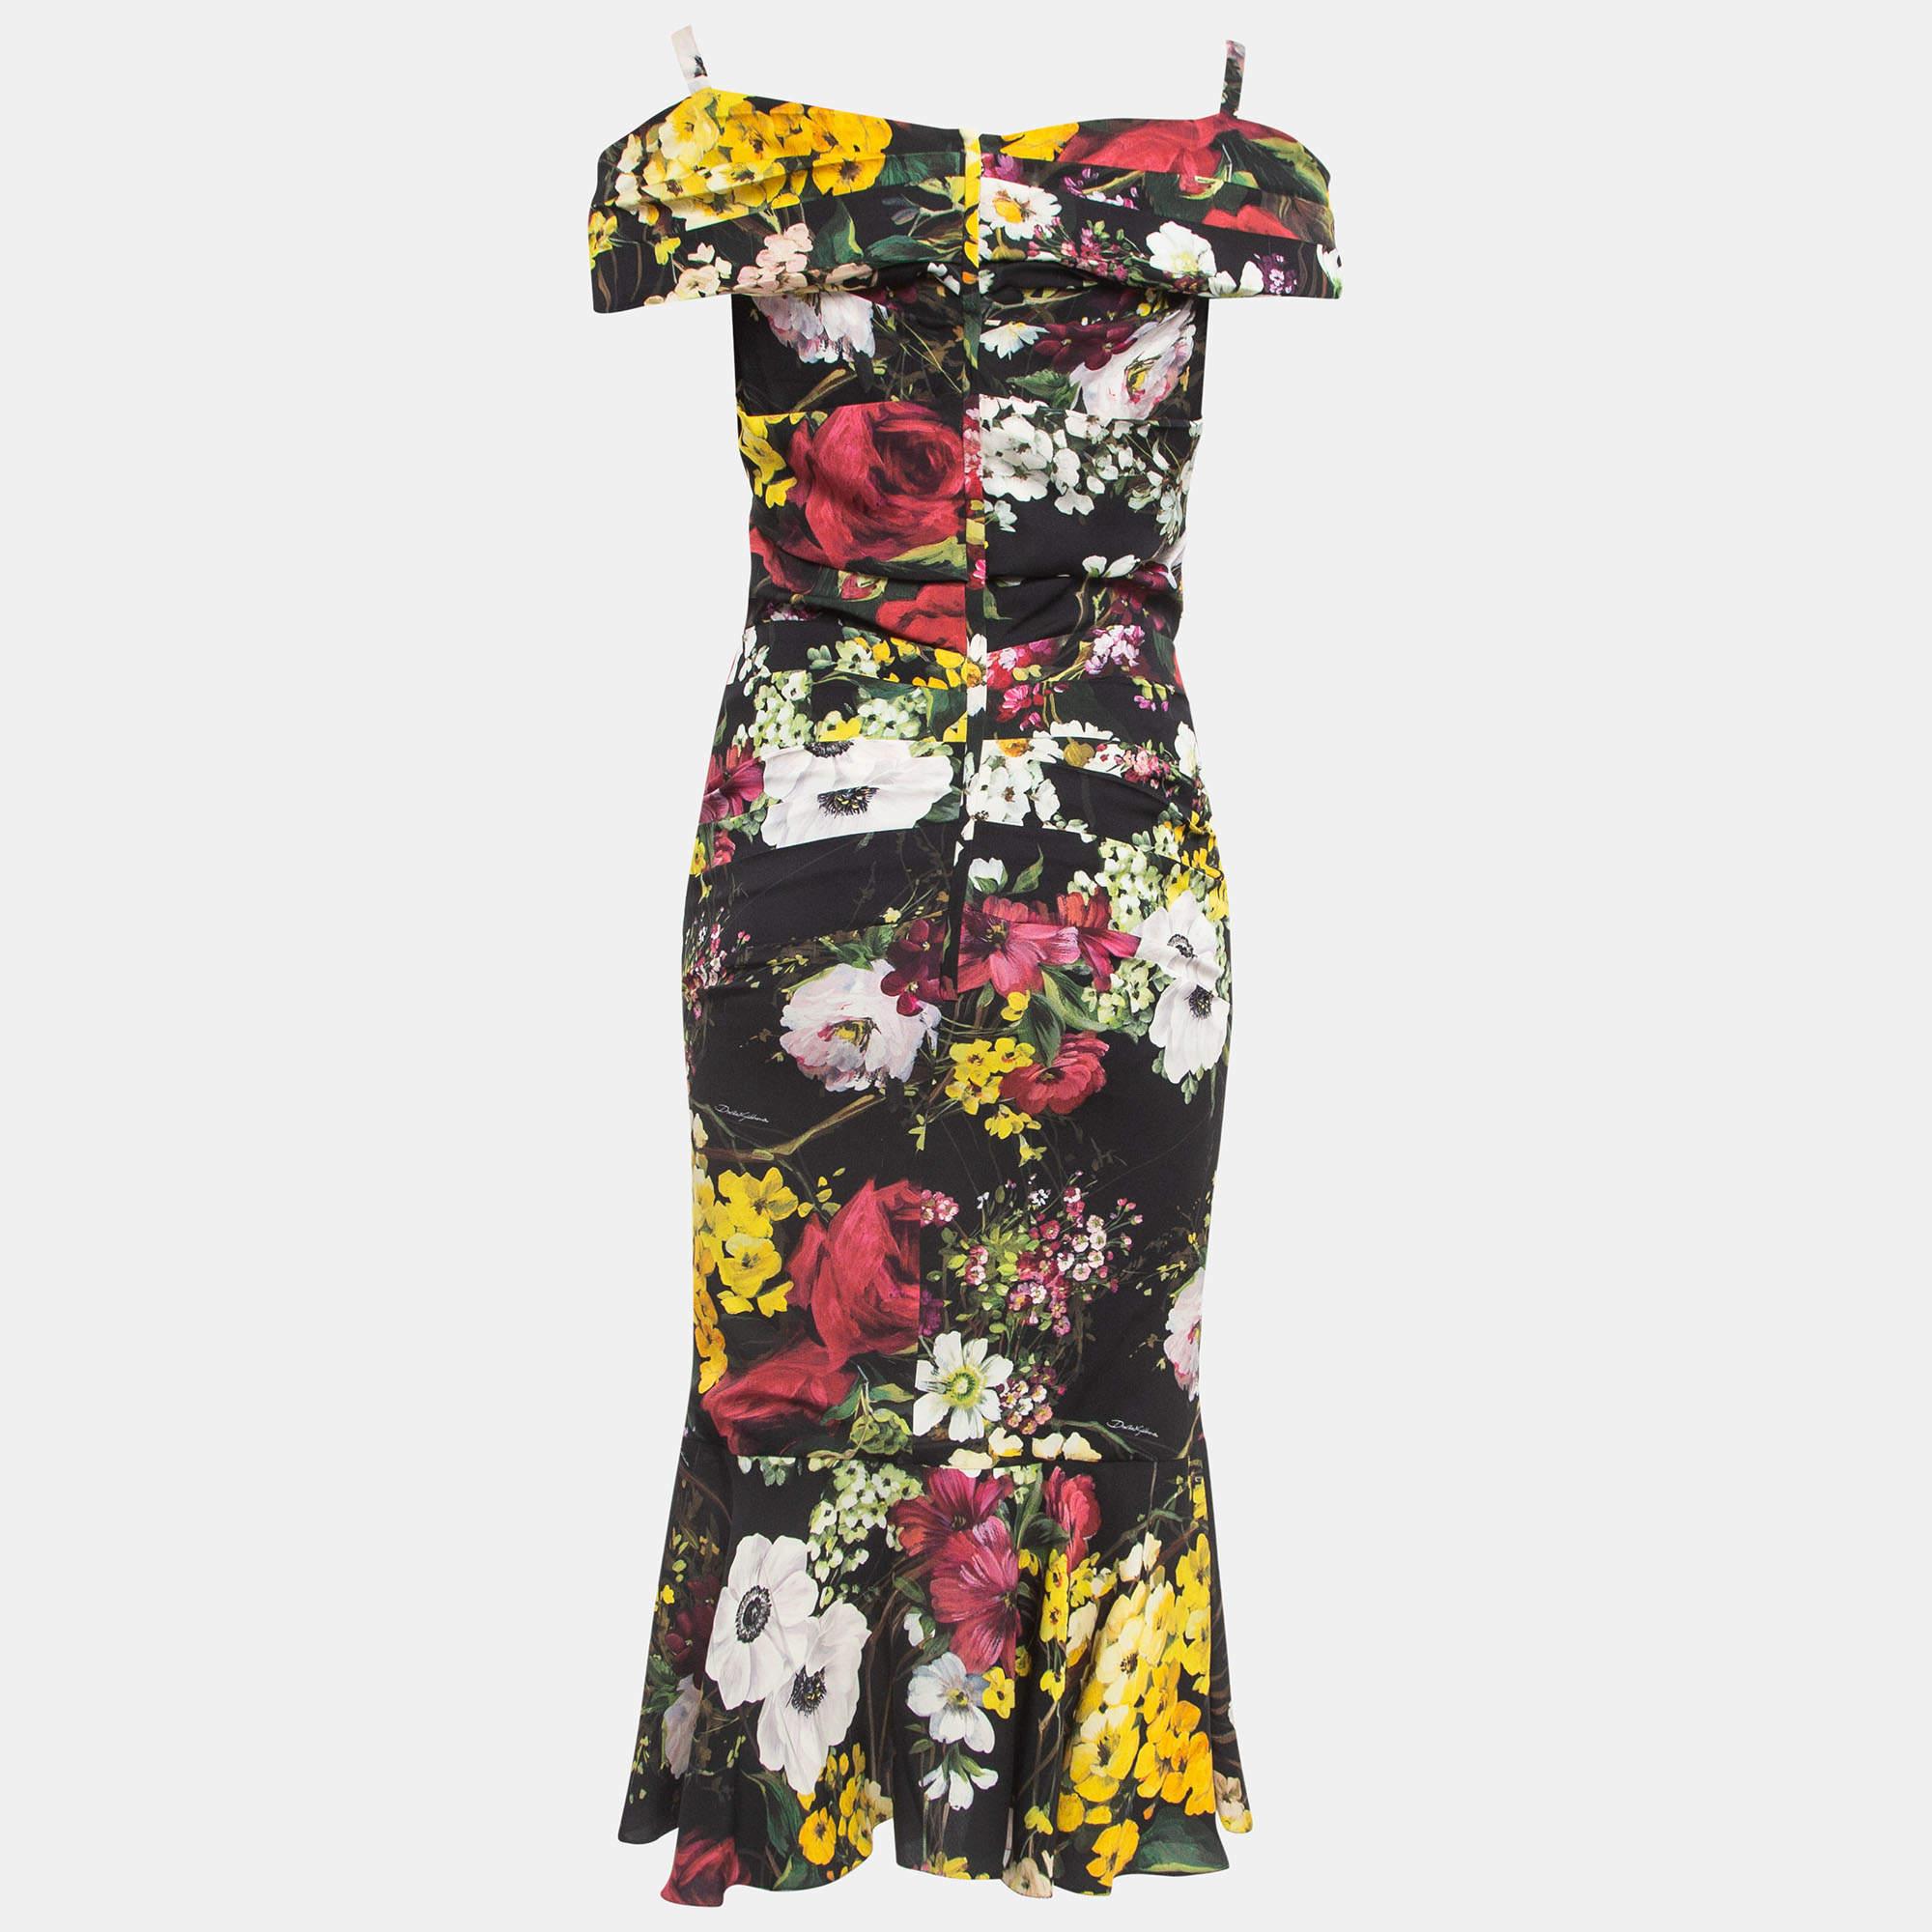 Dolce & Gabbana's beautiful floral-printed dress will spring you right into the warm memories of summer! Endowed with ruched detailing on the side, this black silhouette exhibits cold-shoulder sleeves and a flared hemline. A zipper is added for